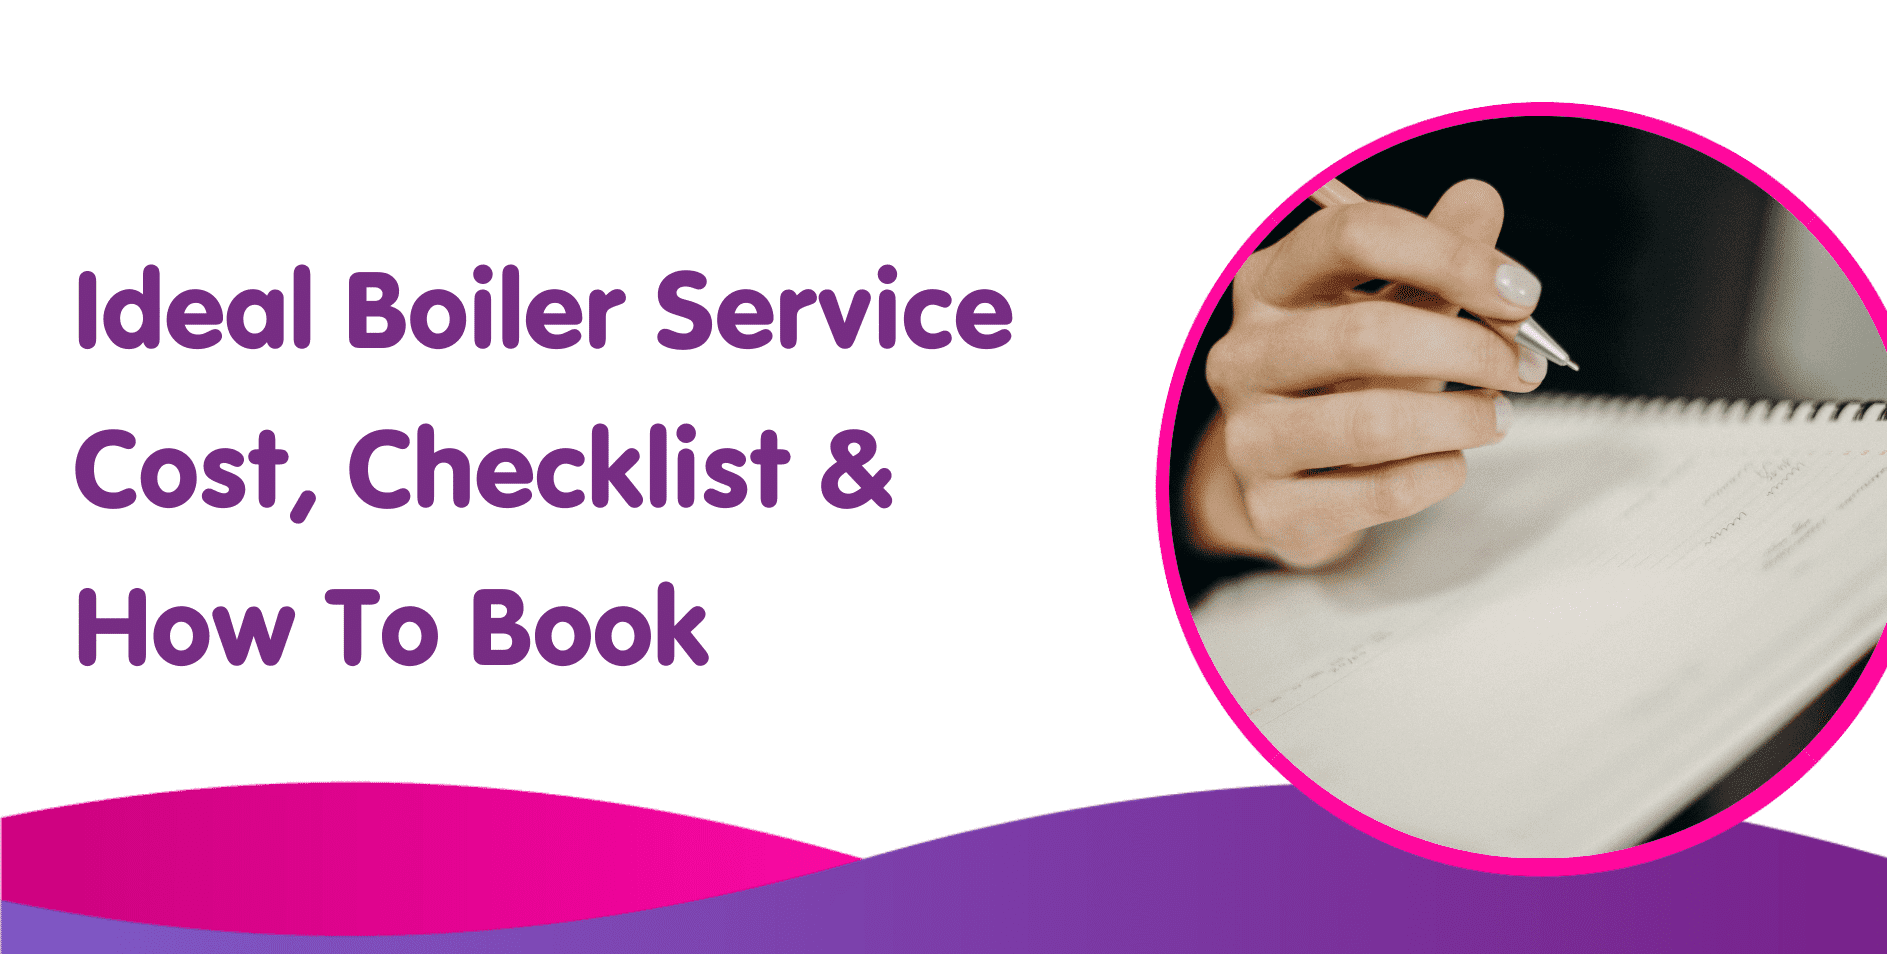 Ideal Boiler Service Cost, Checklist & How To Book